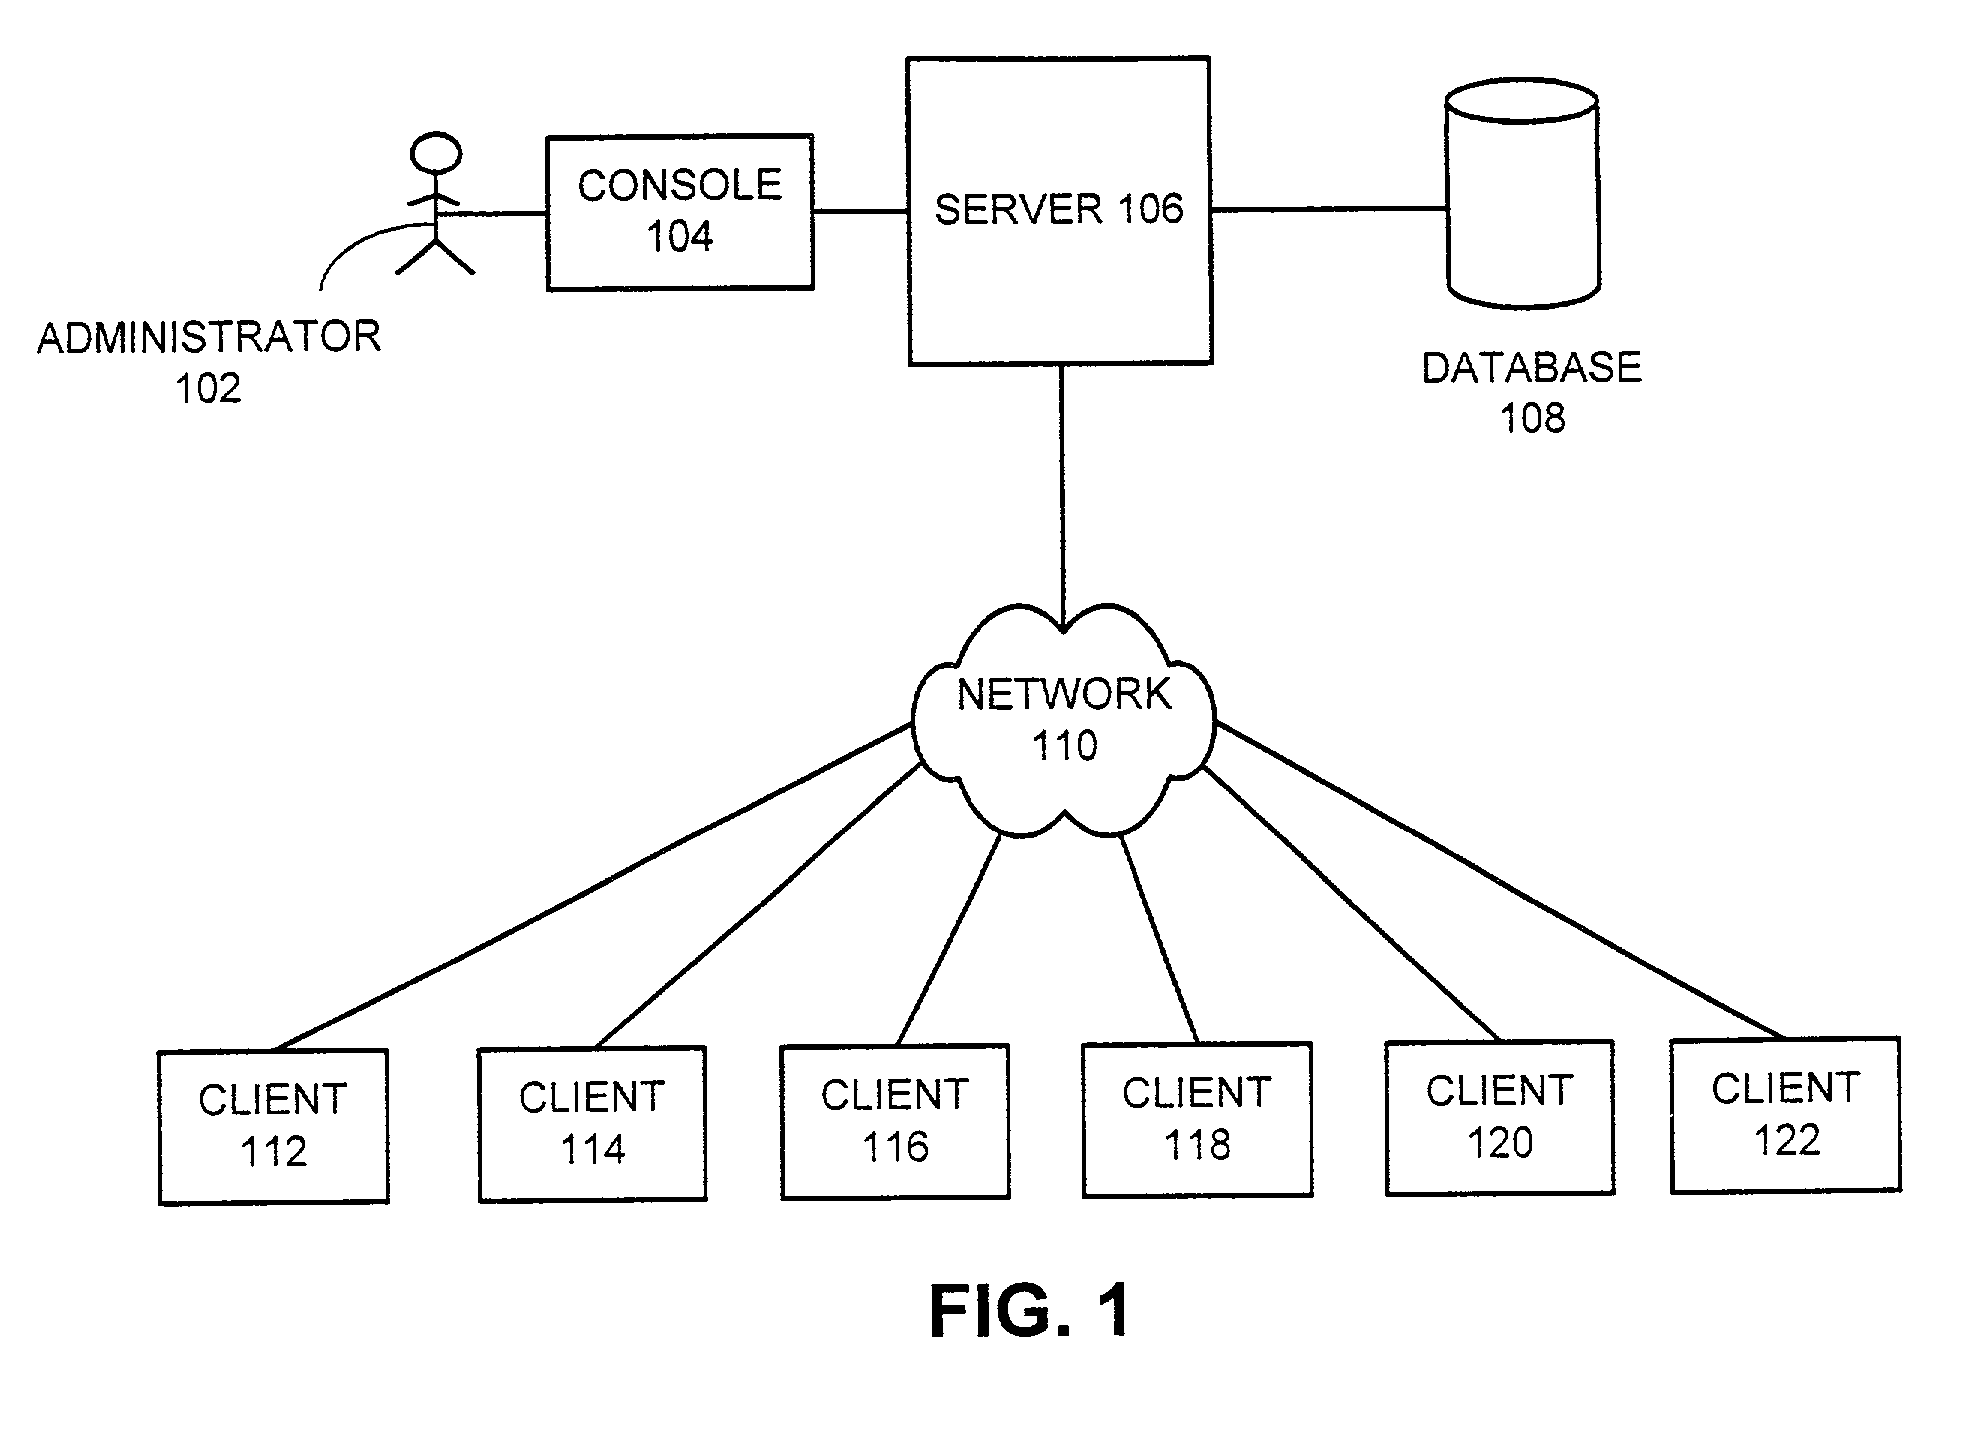 Method and apparatus to facilitate remote software management by applying network address-sorting rules on a hierarchical directory structure